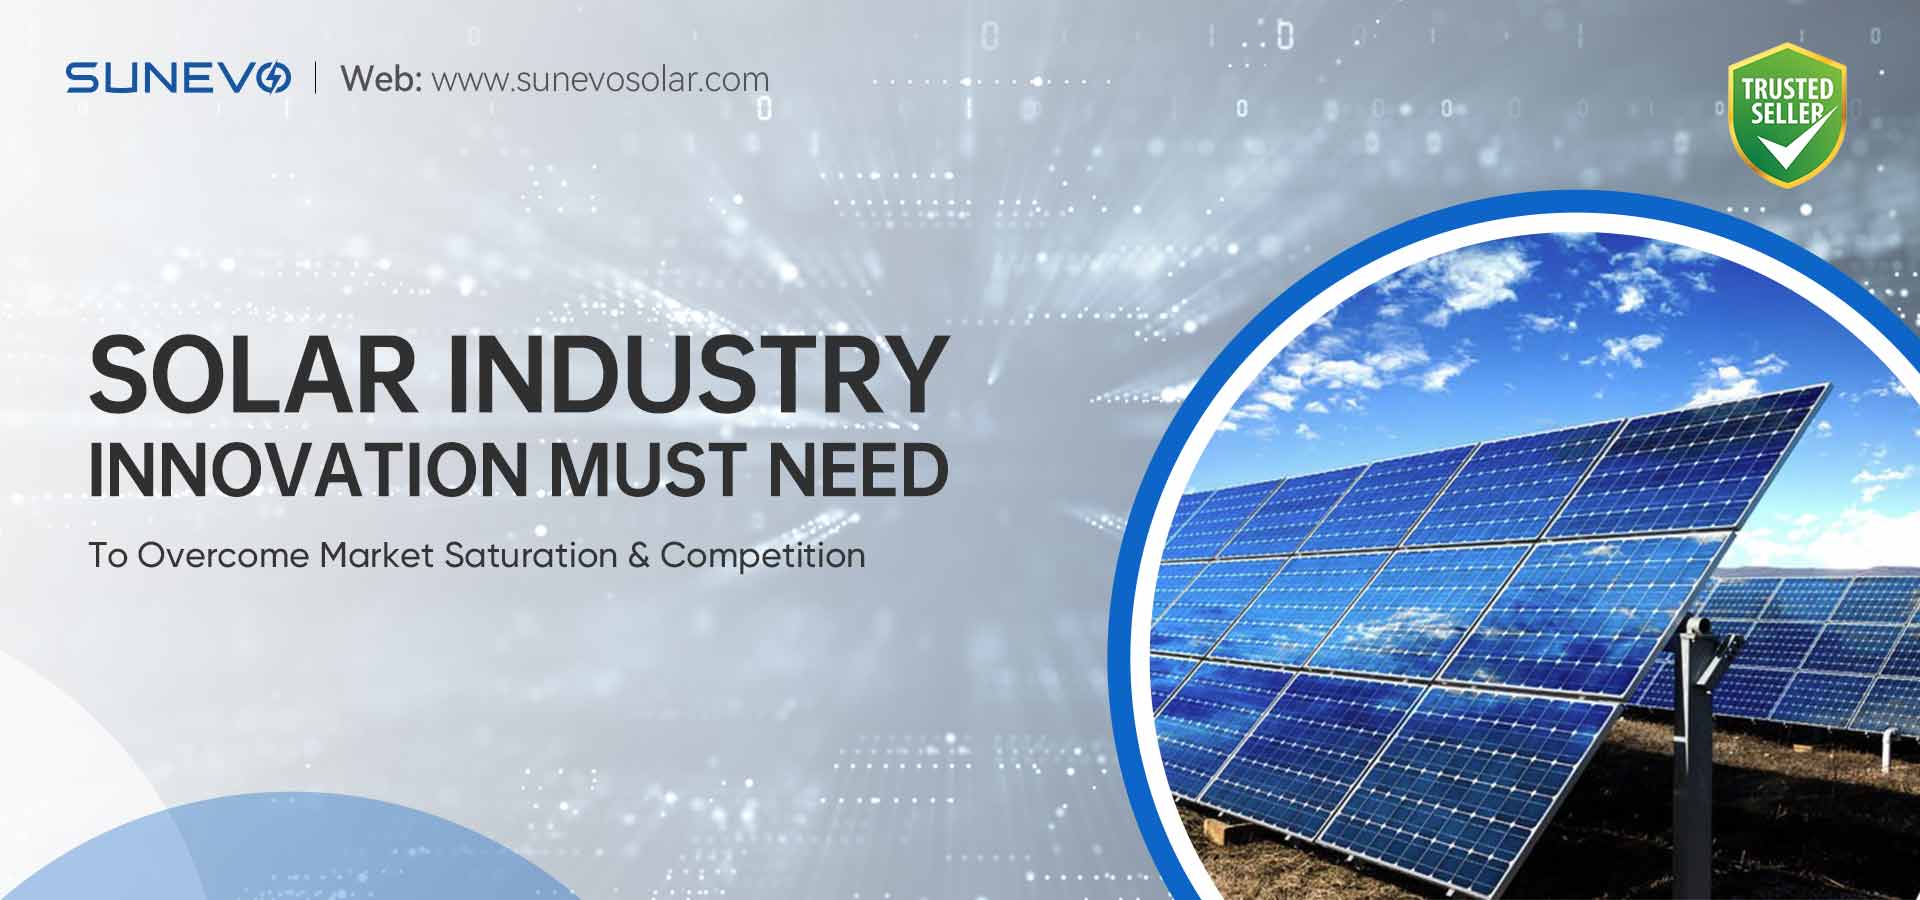 Solar Industry Needs Innovation To Overcome Market Saturation & Competition